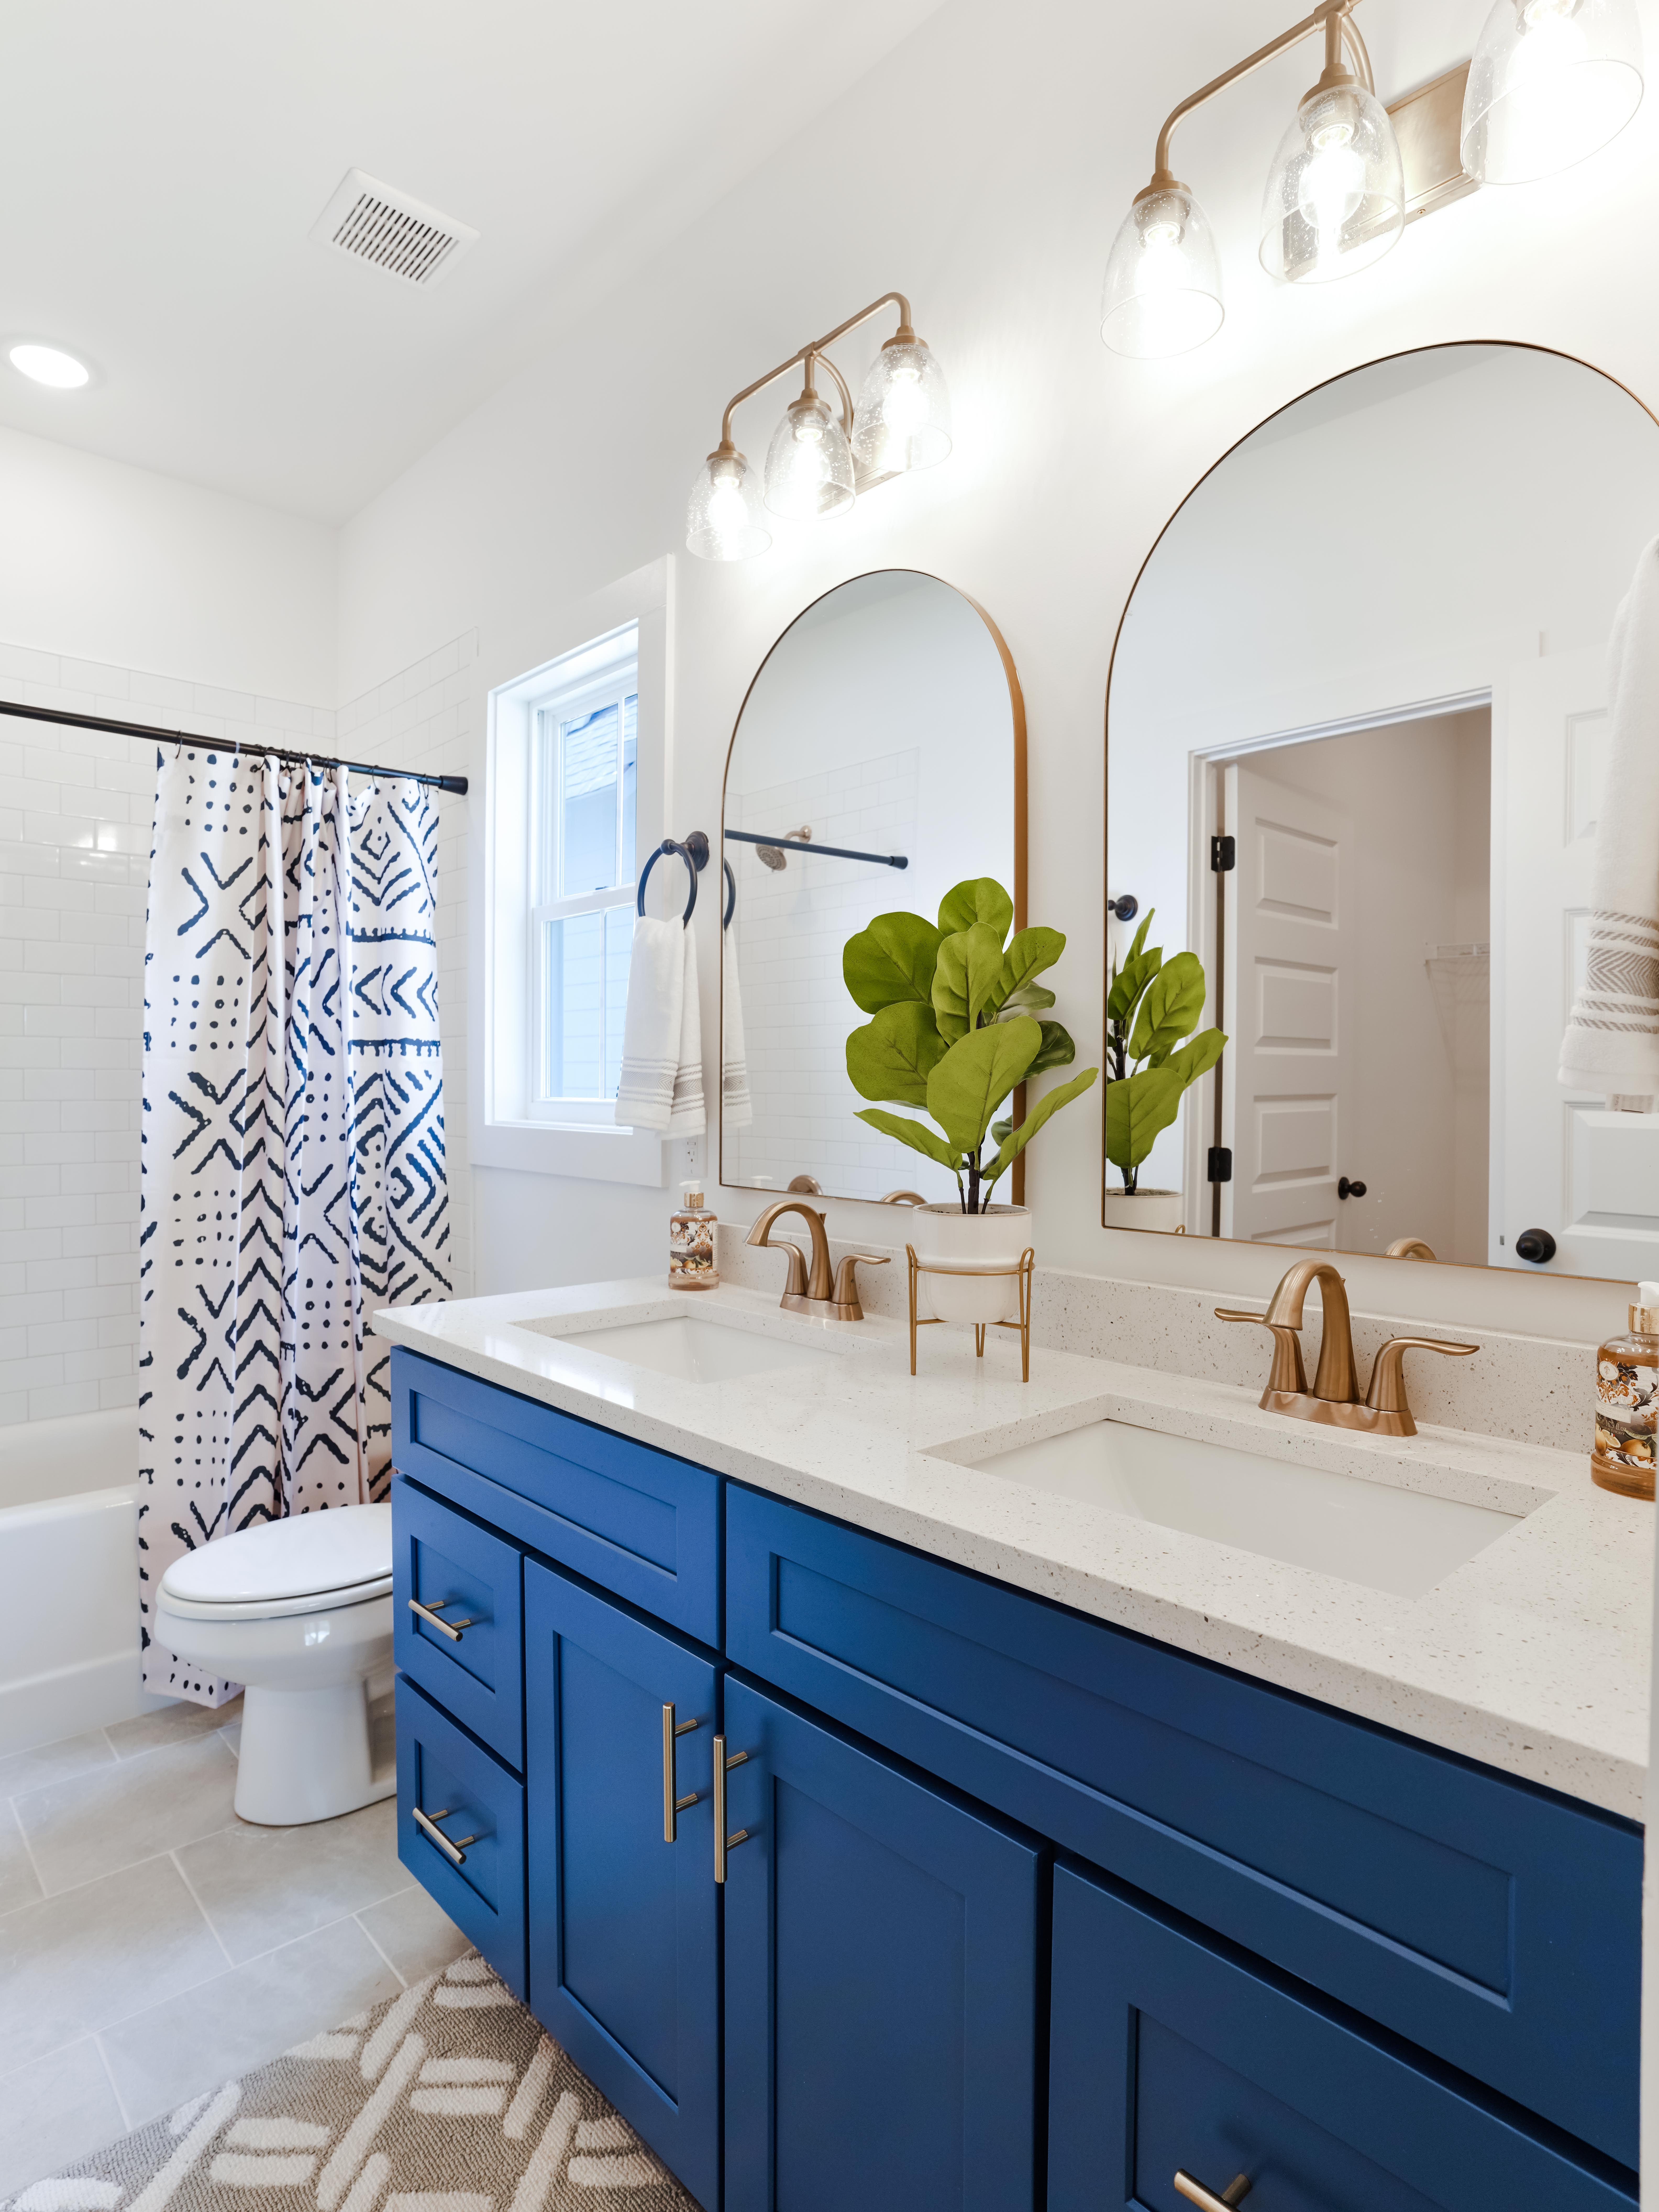 Top Trends for your Bathroom